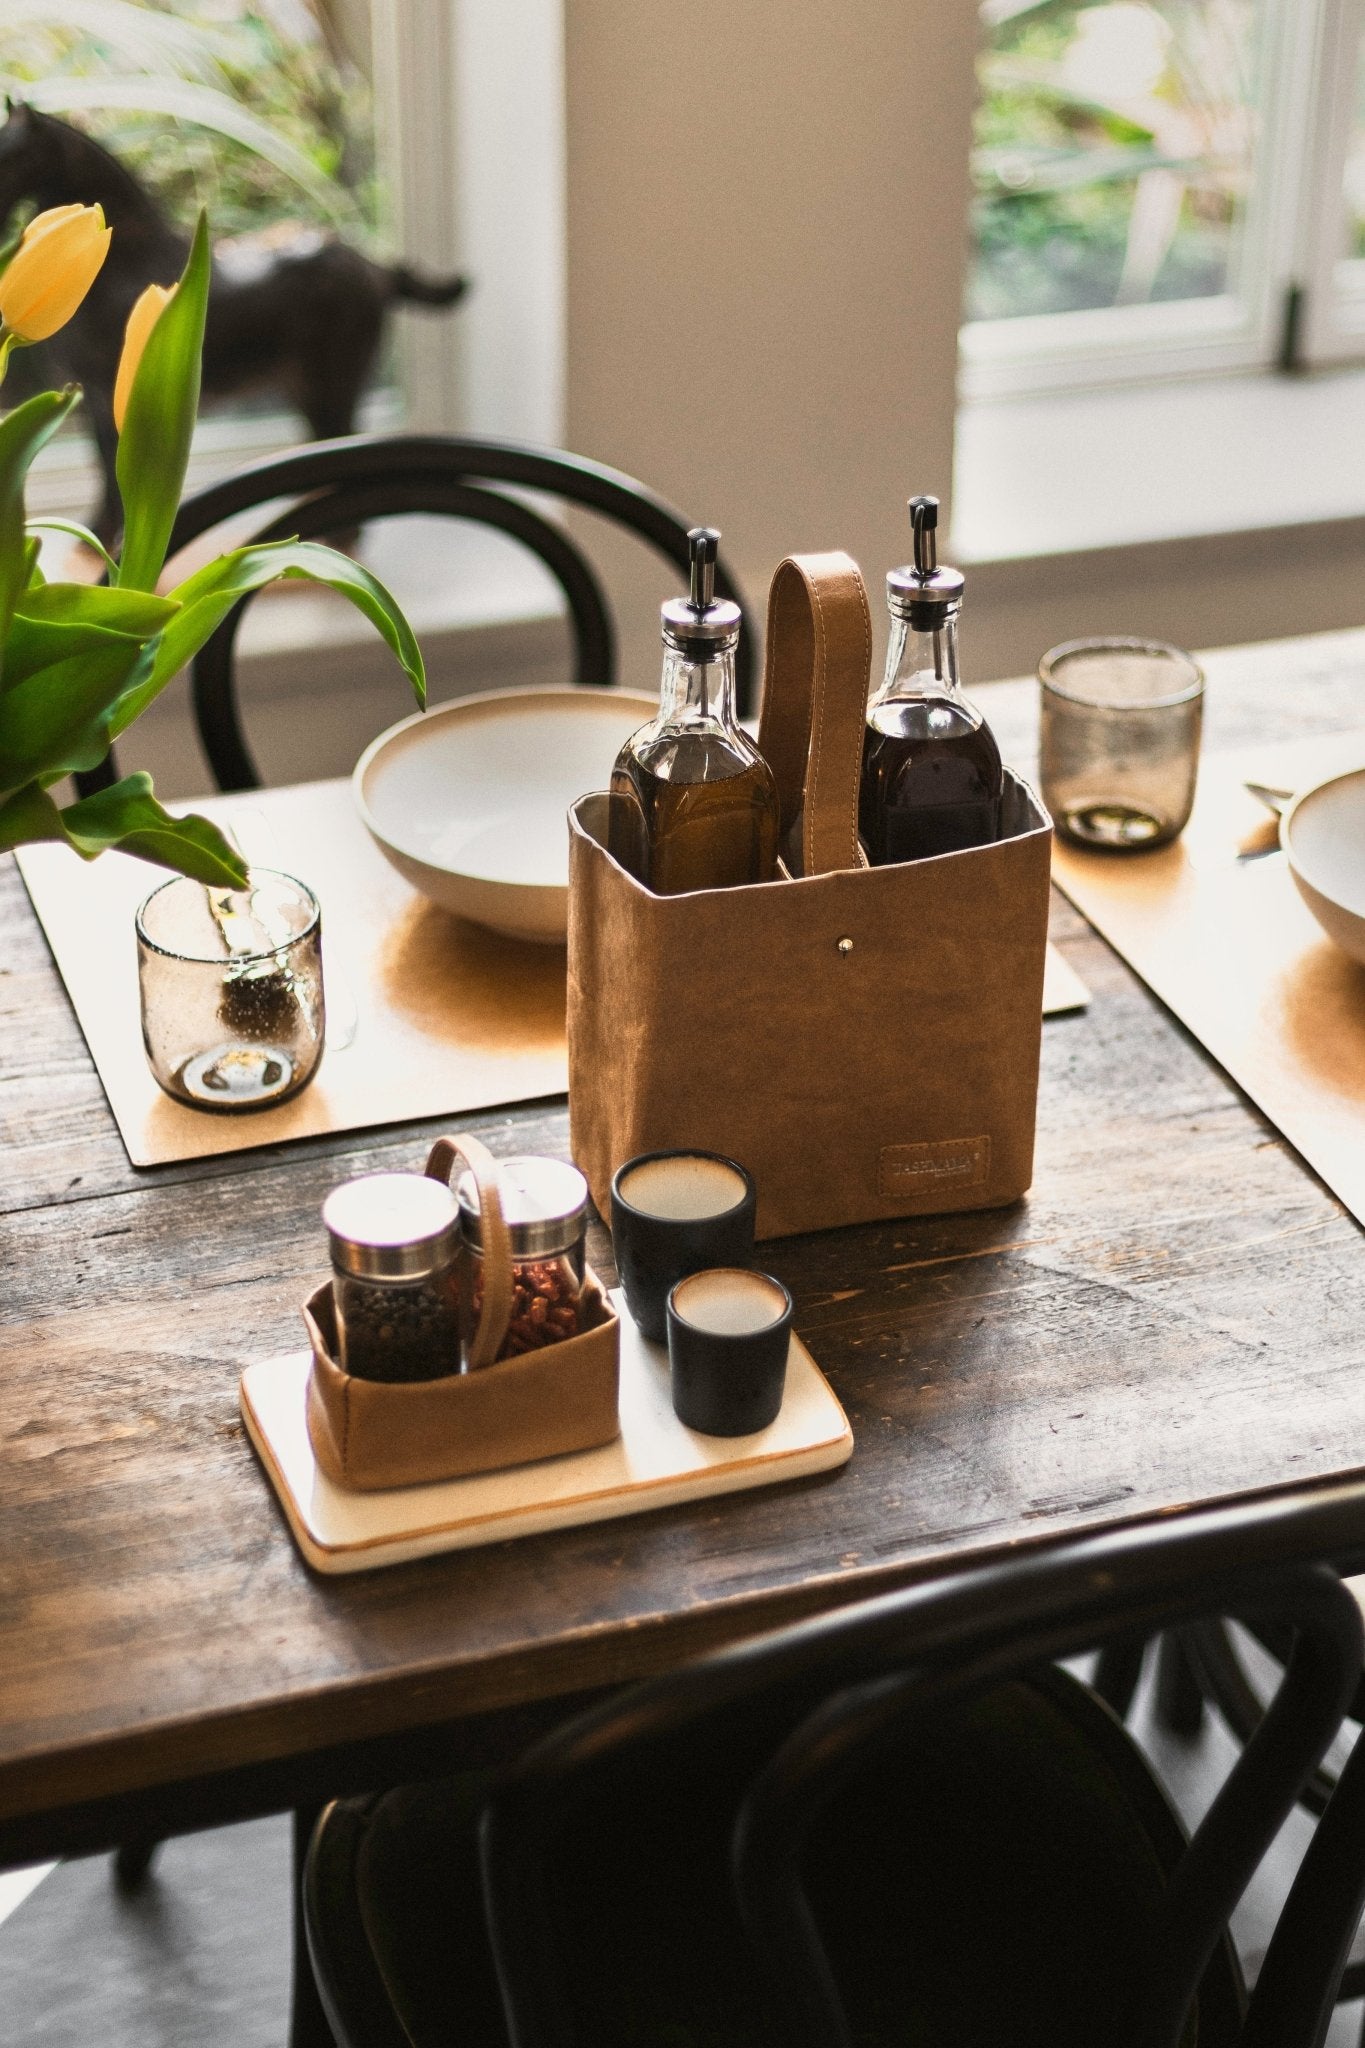 A wooden table top is set for a meal. A tan washable paper utensil holder contains an oil and vinegar bottle. A smaller washable paper utensil holder contains spices.